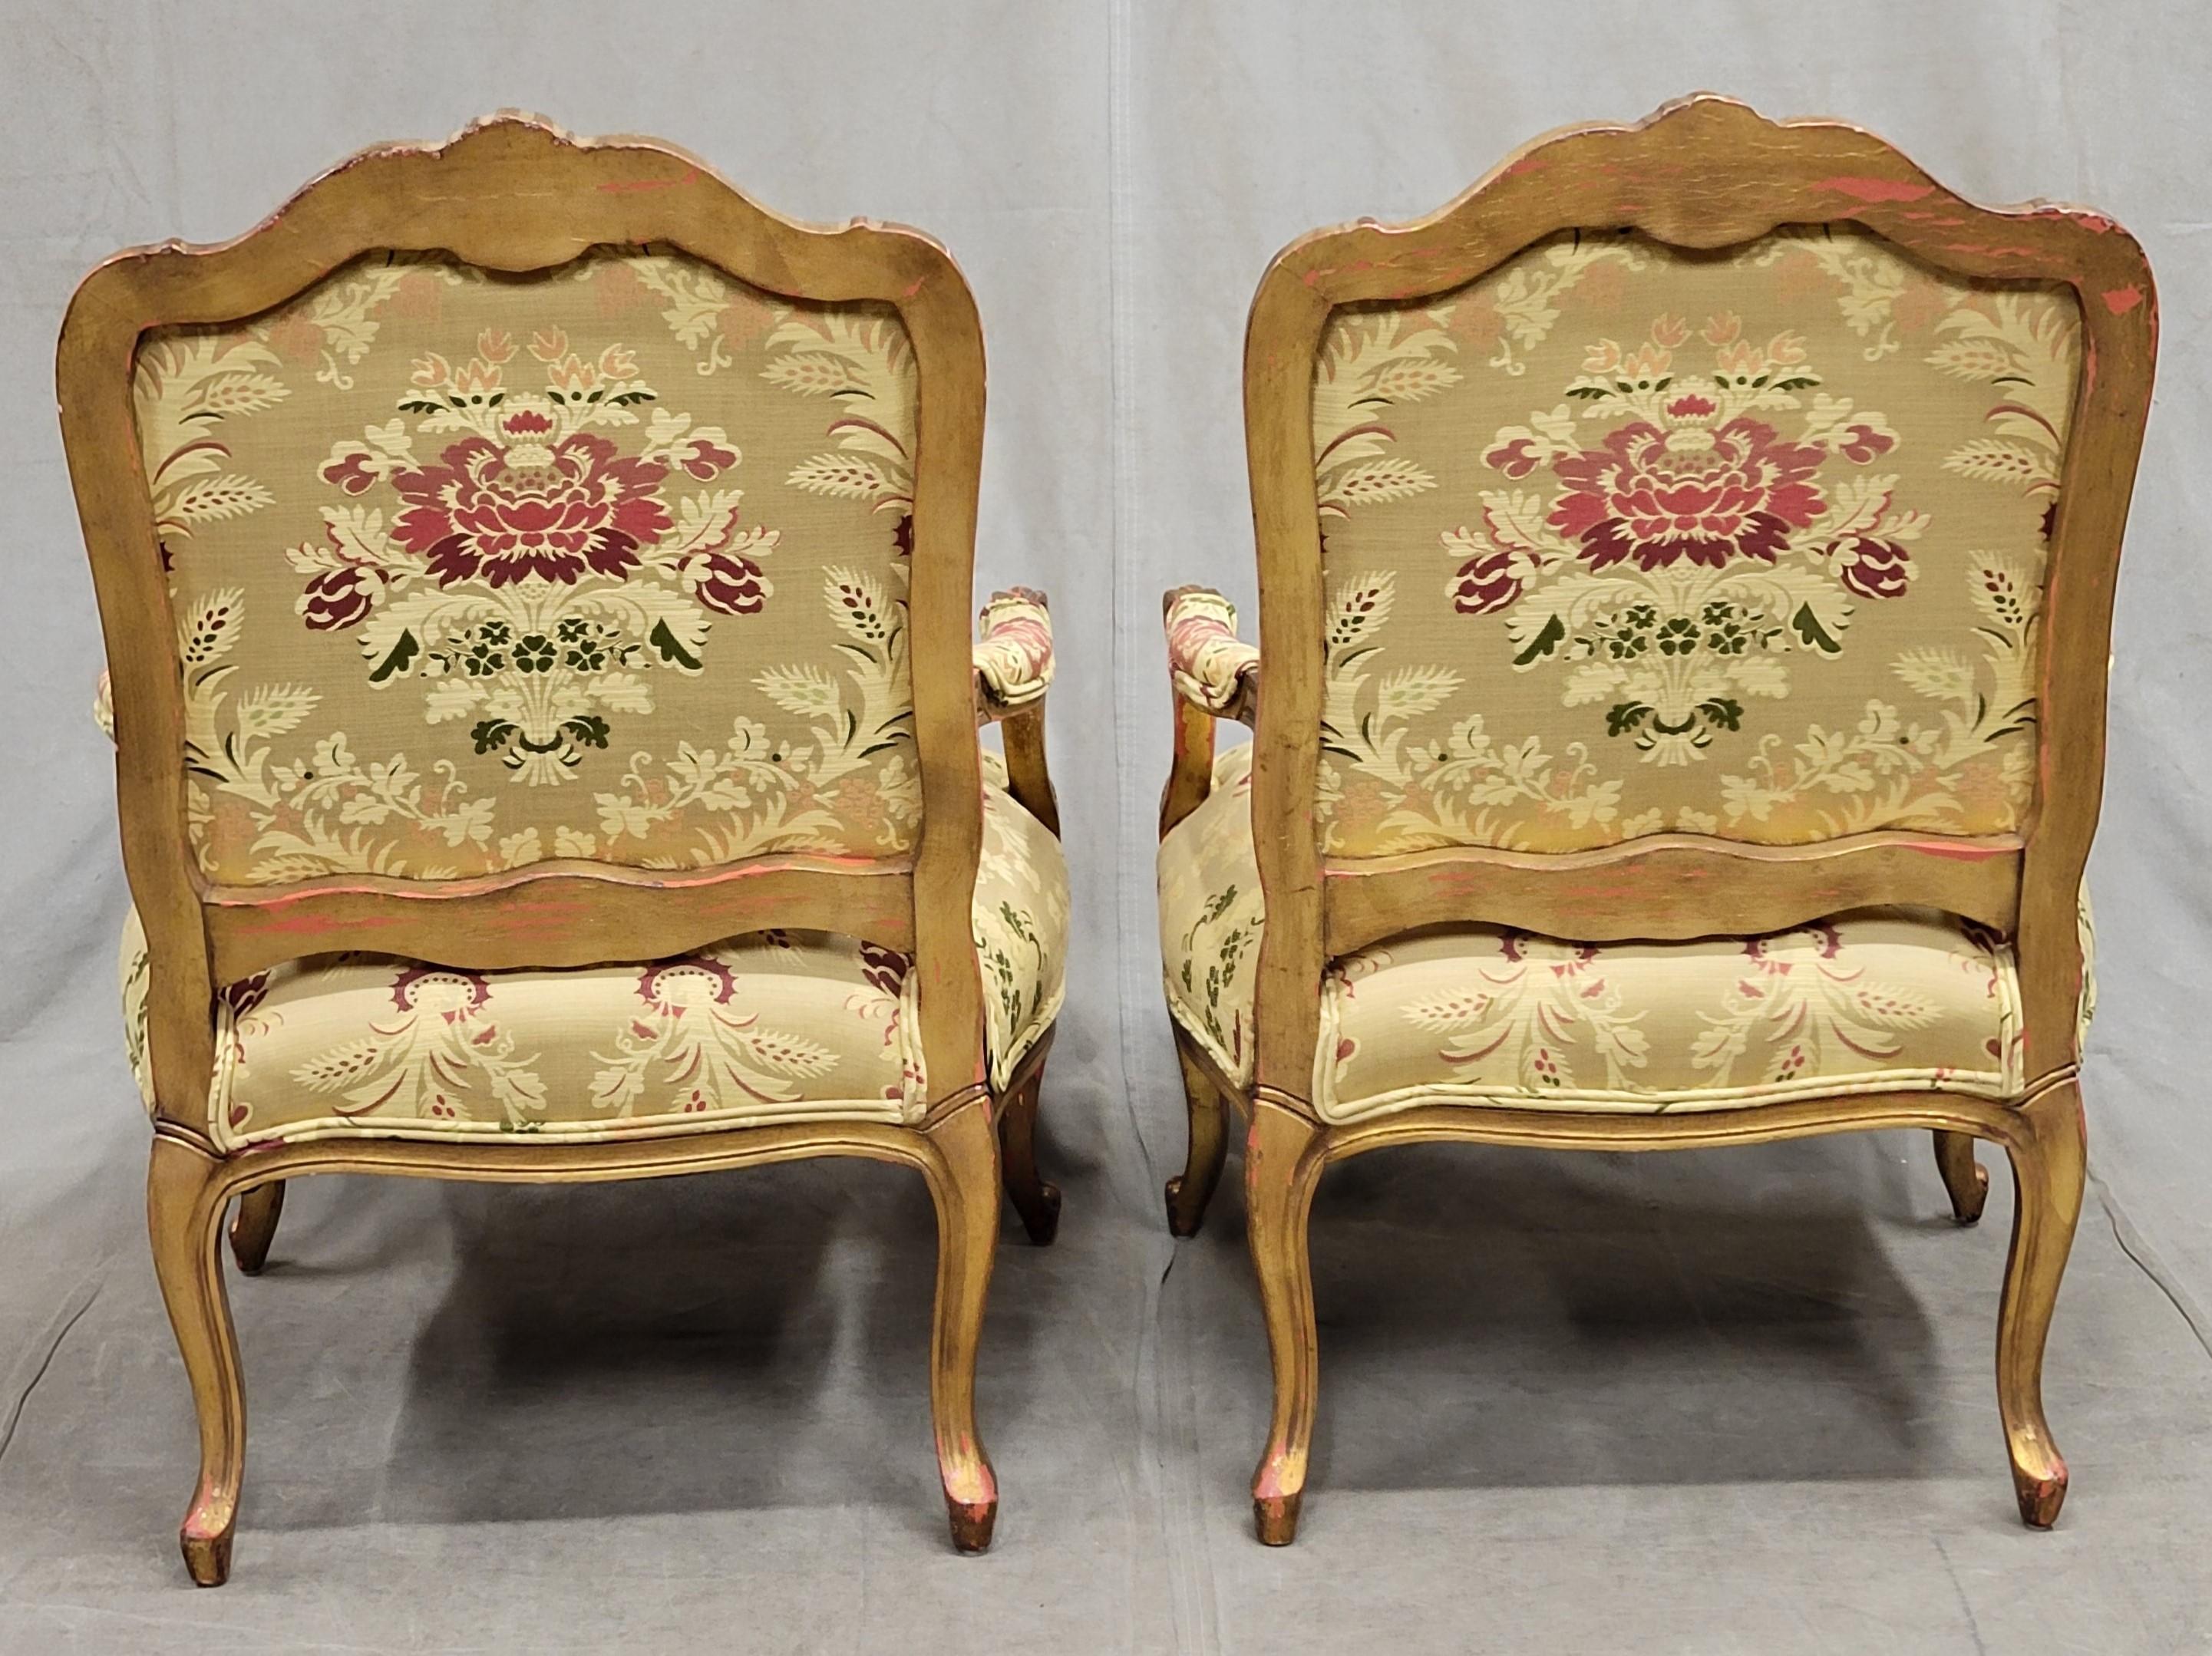 Vintage French Gold Leaf Bergere Chairs With Designer Damask Upholstery - a Pair 6